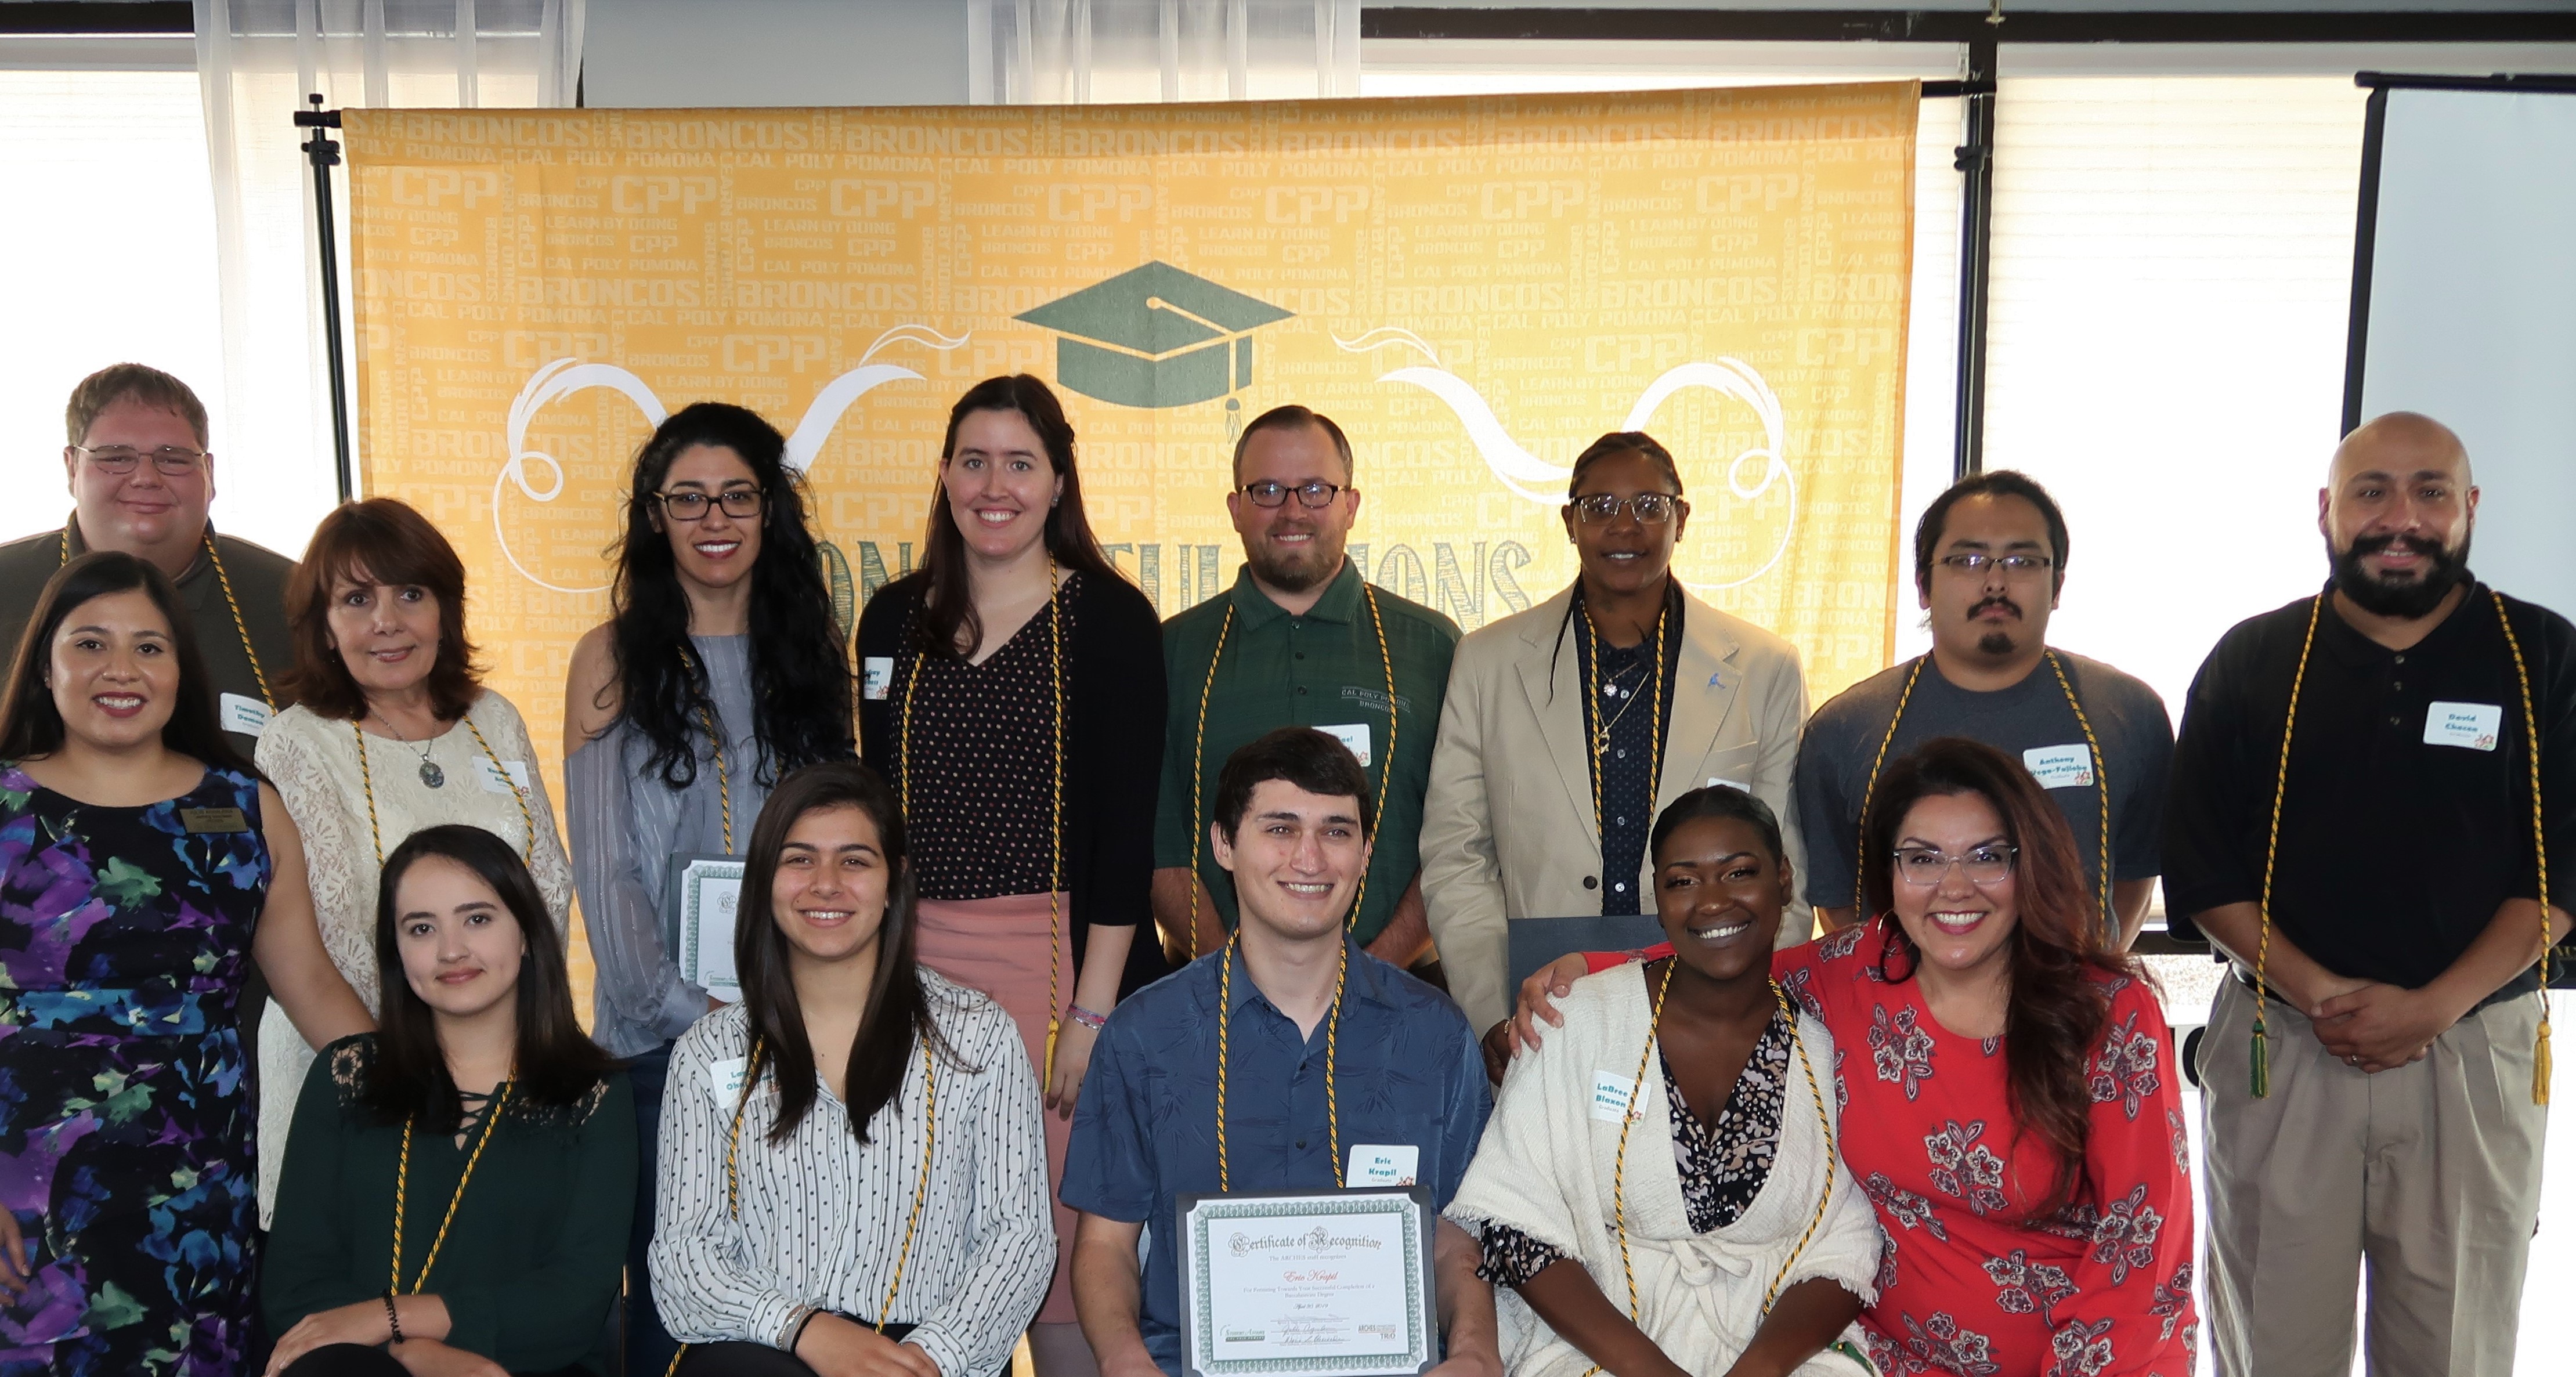 2019 ARCHES Graduation Luncheon Group Photo